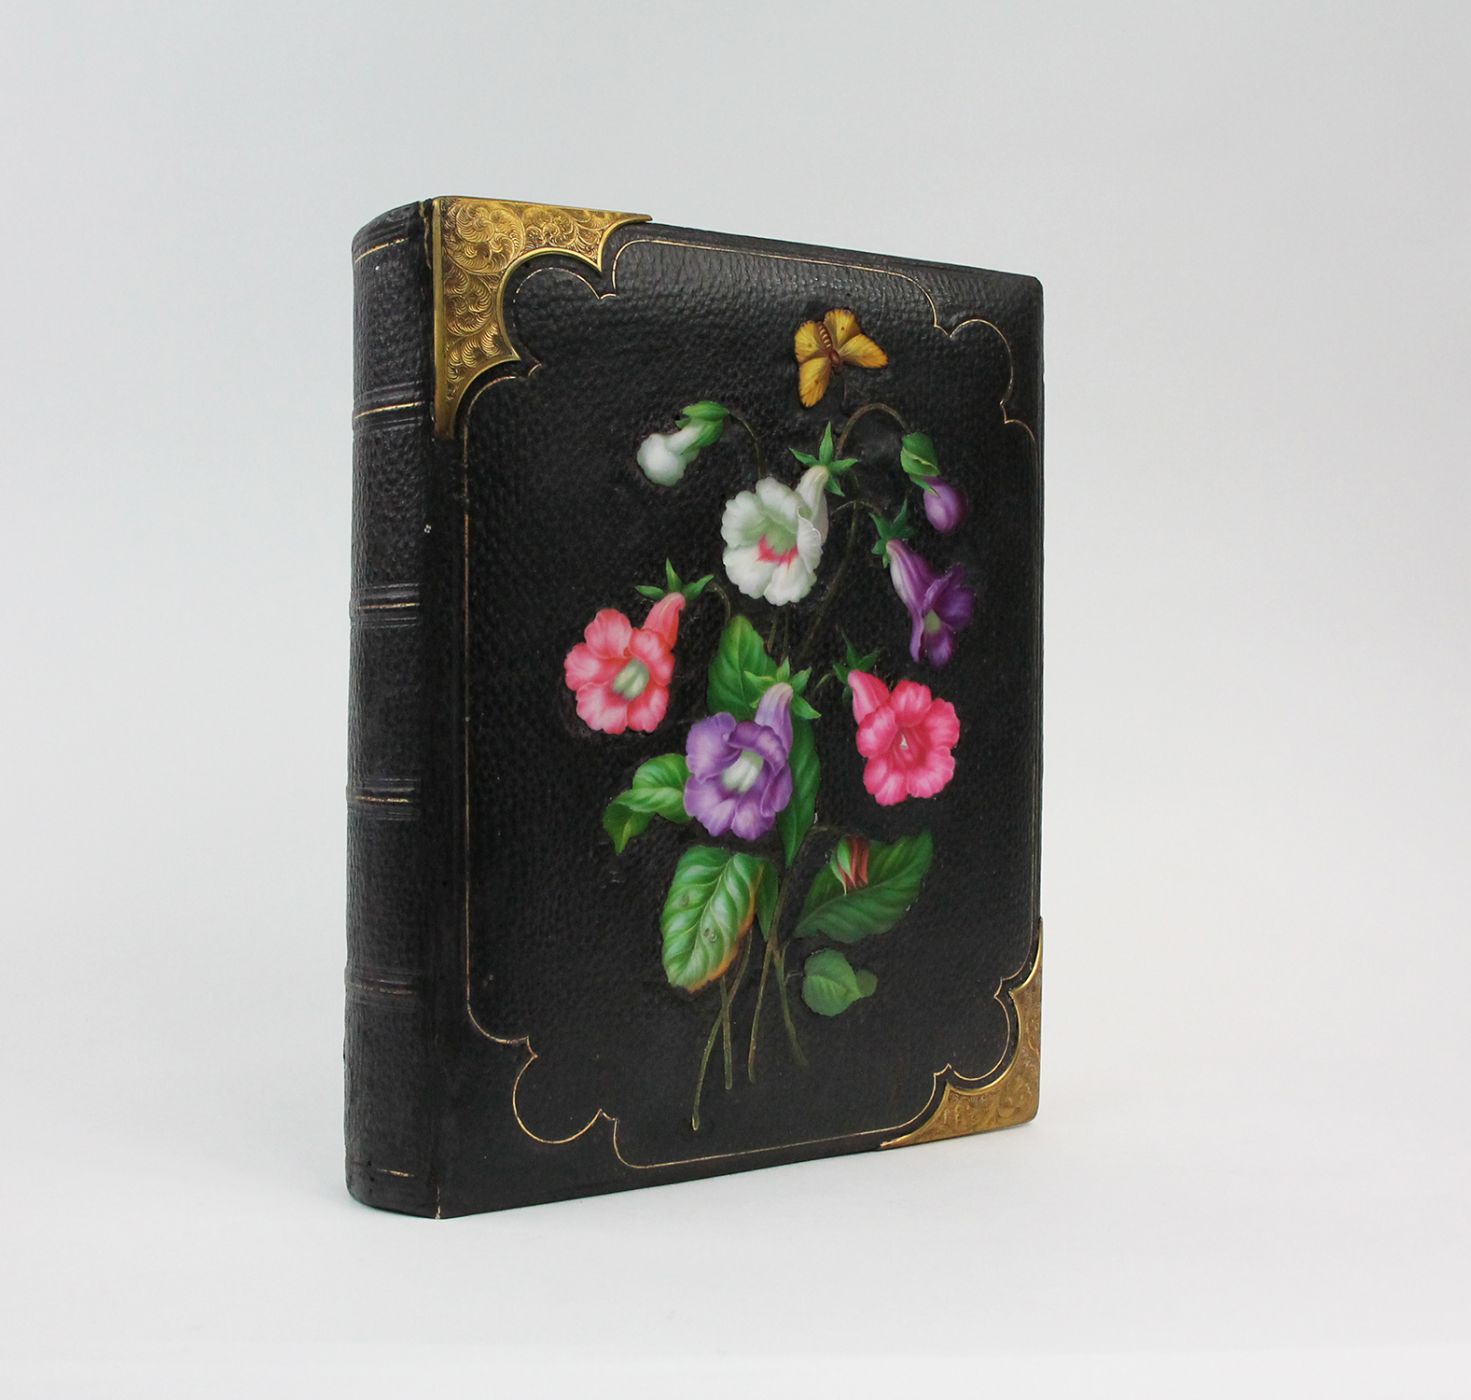 EUROPEAN GRAND TOUR PHOTOGRAPH ALBUM IN A VIENNESE PORCELAIN-DECORATED BINDING -  image 1